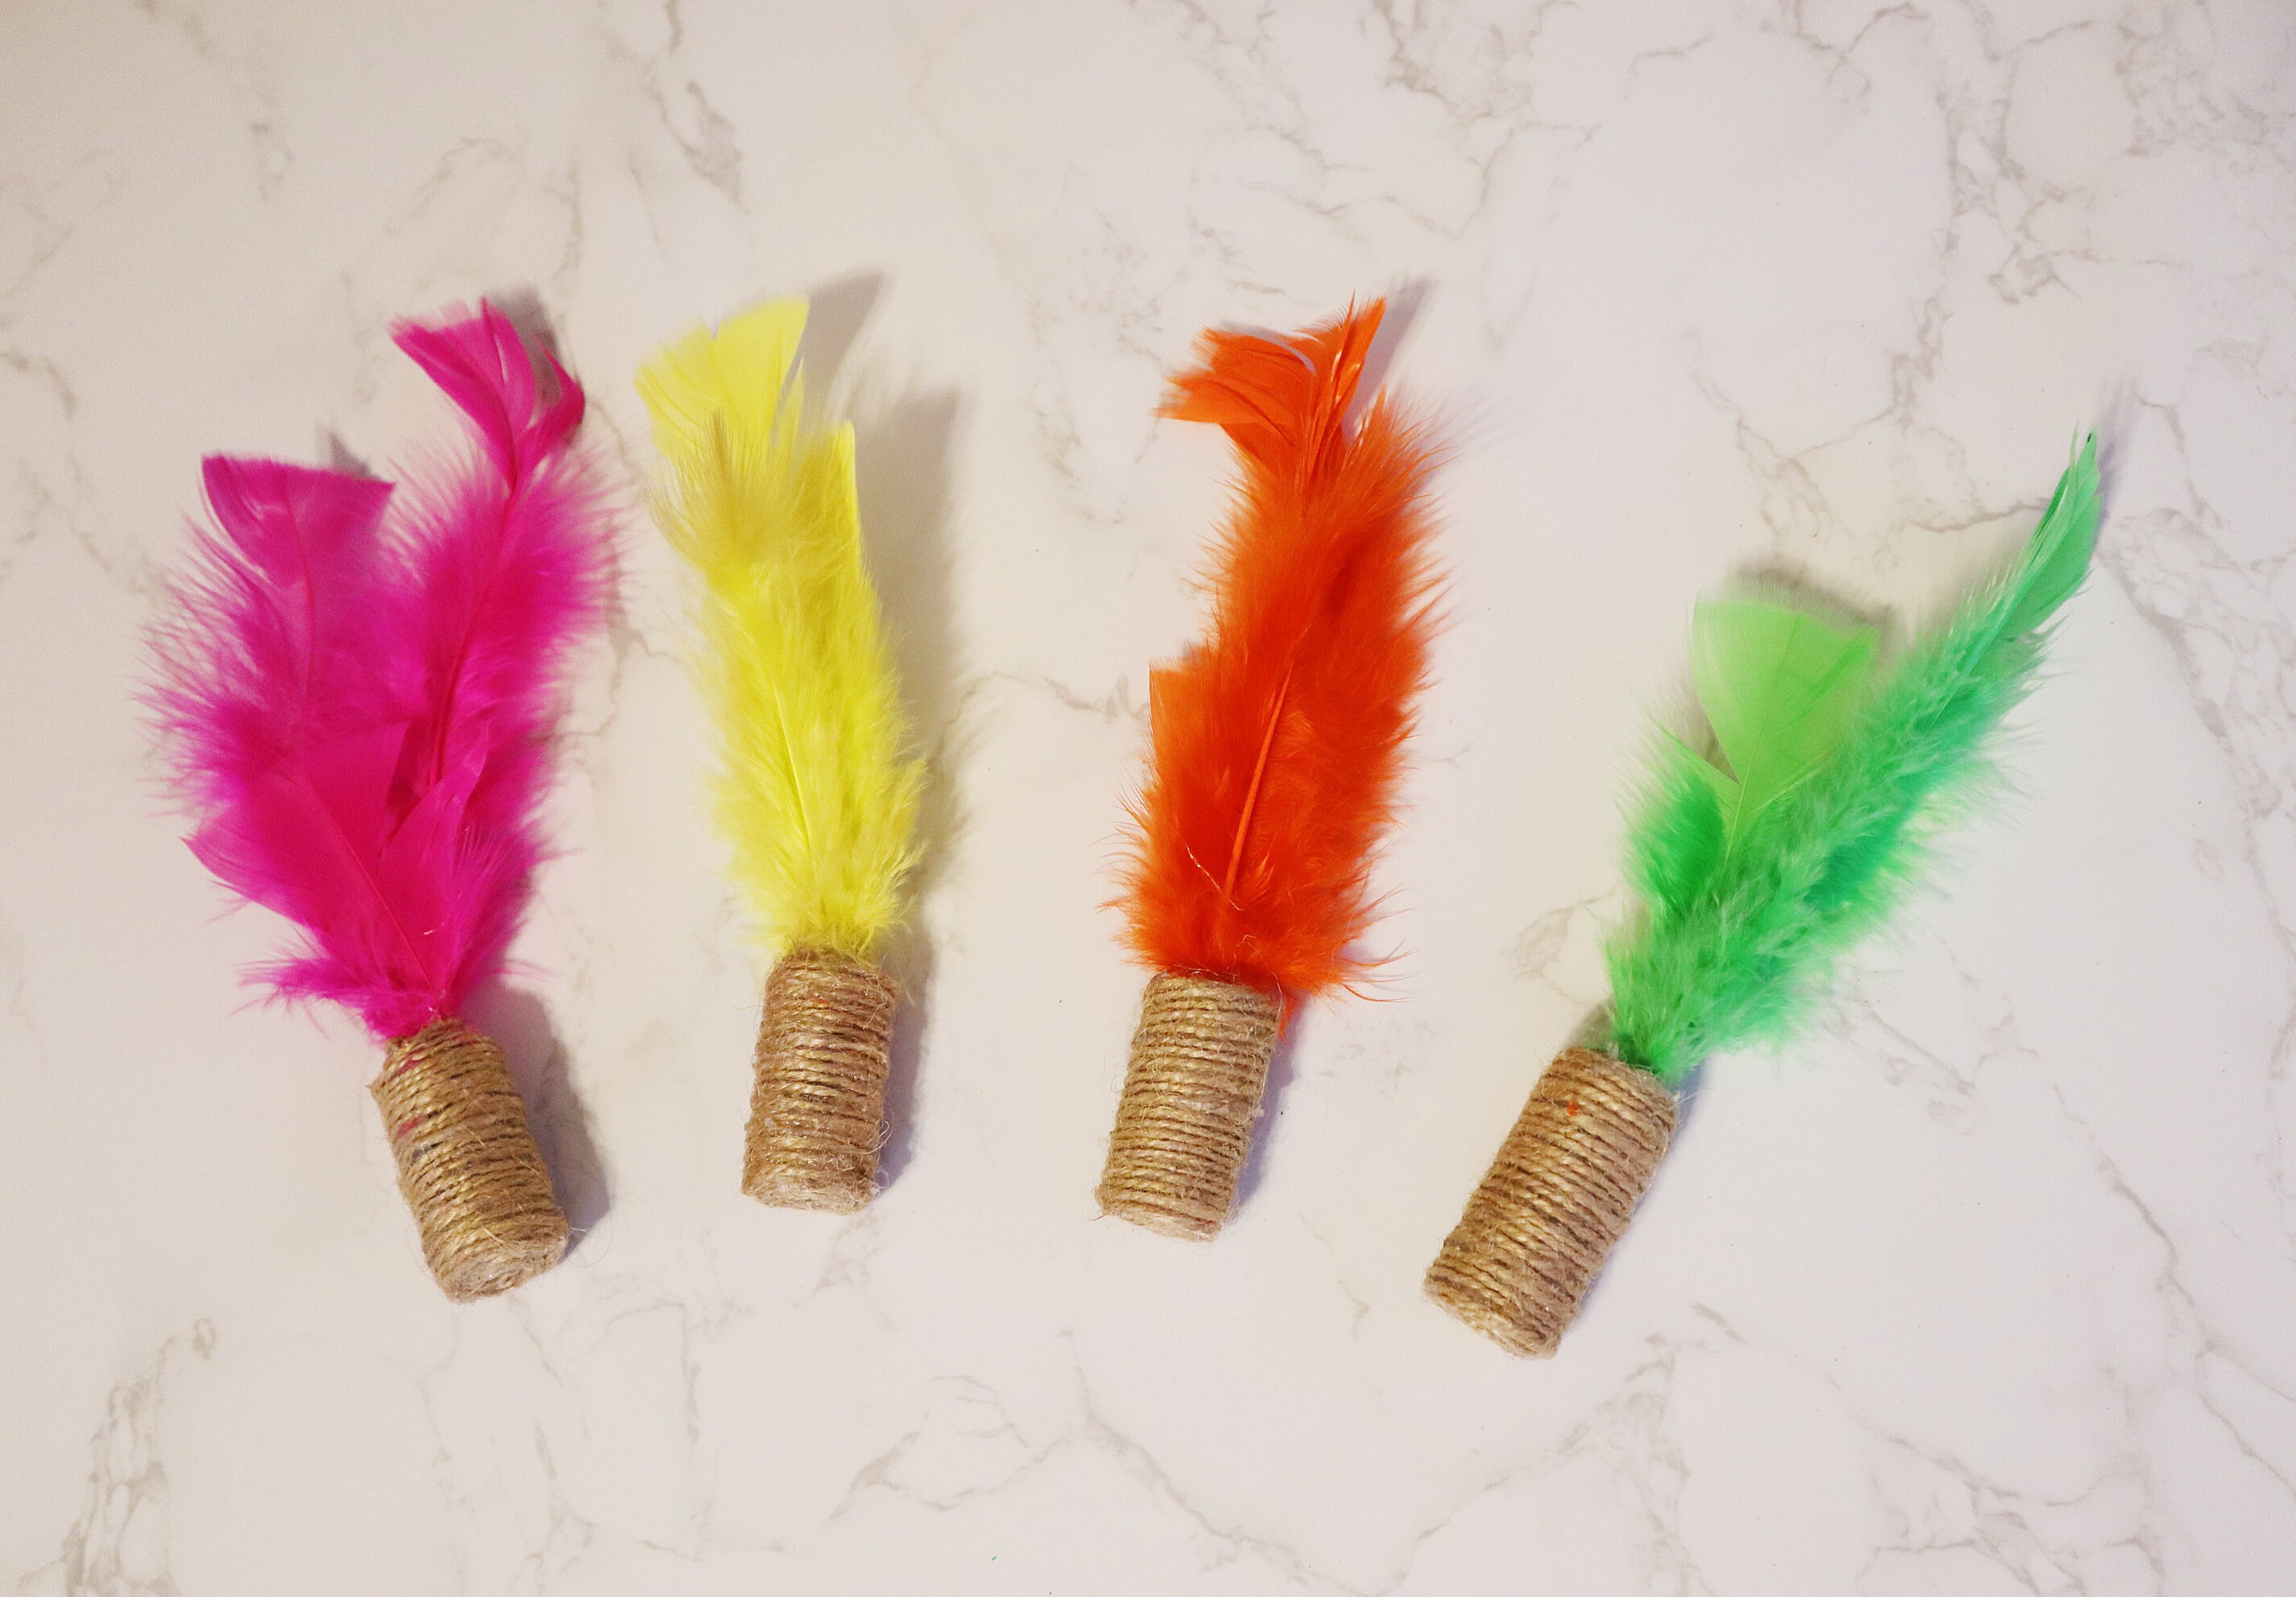 Detachable Design Cat Teaser Rods. LEKLIT Cat Cork Ball Feather Wand Toys with Strong Suction Cups Window Kitten Colorful Feathers Bell Toys for Indoor Cats 